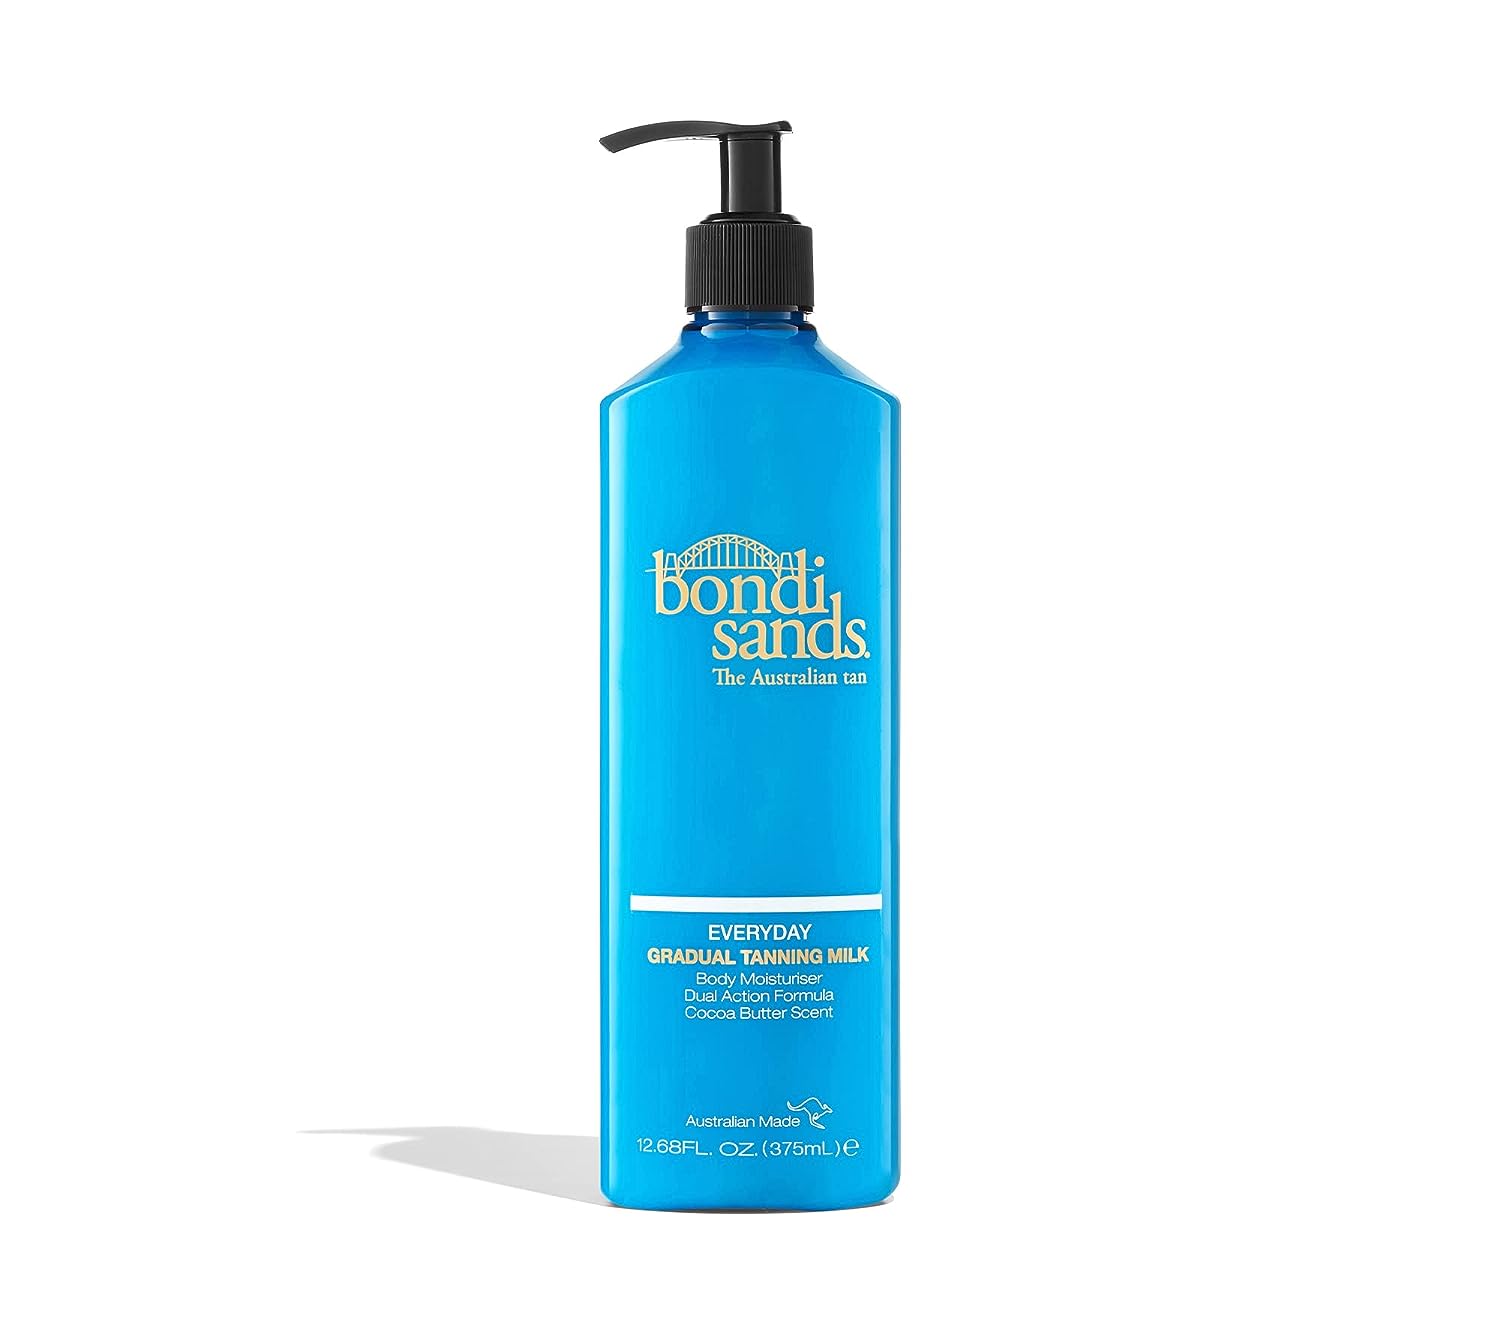 Bondi Sands Everyday Gradual Tanning Milk | Long-Lasting, Tanning Body Moisturizer Enriched With Aloe Vera and Vitamin E for Glowing Skin